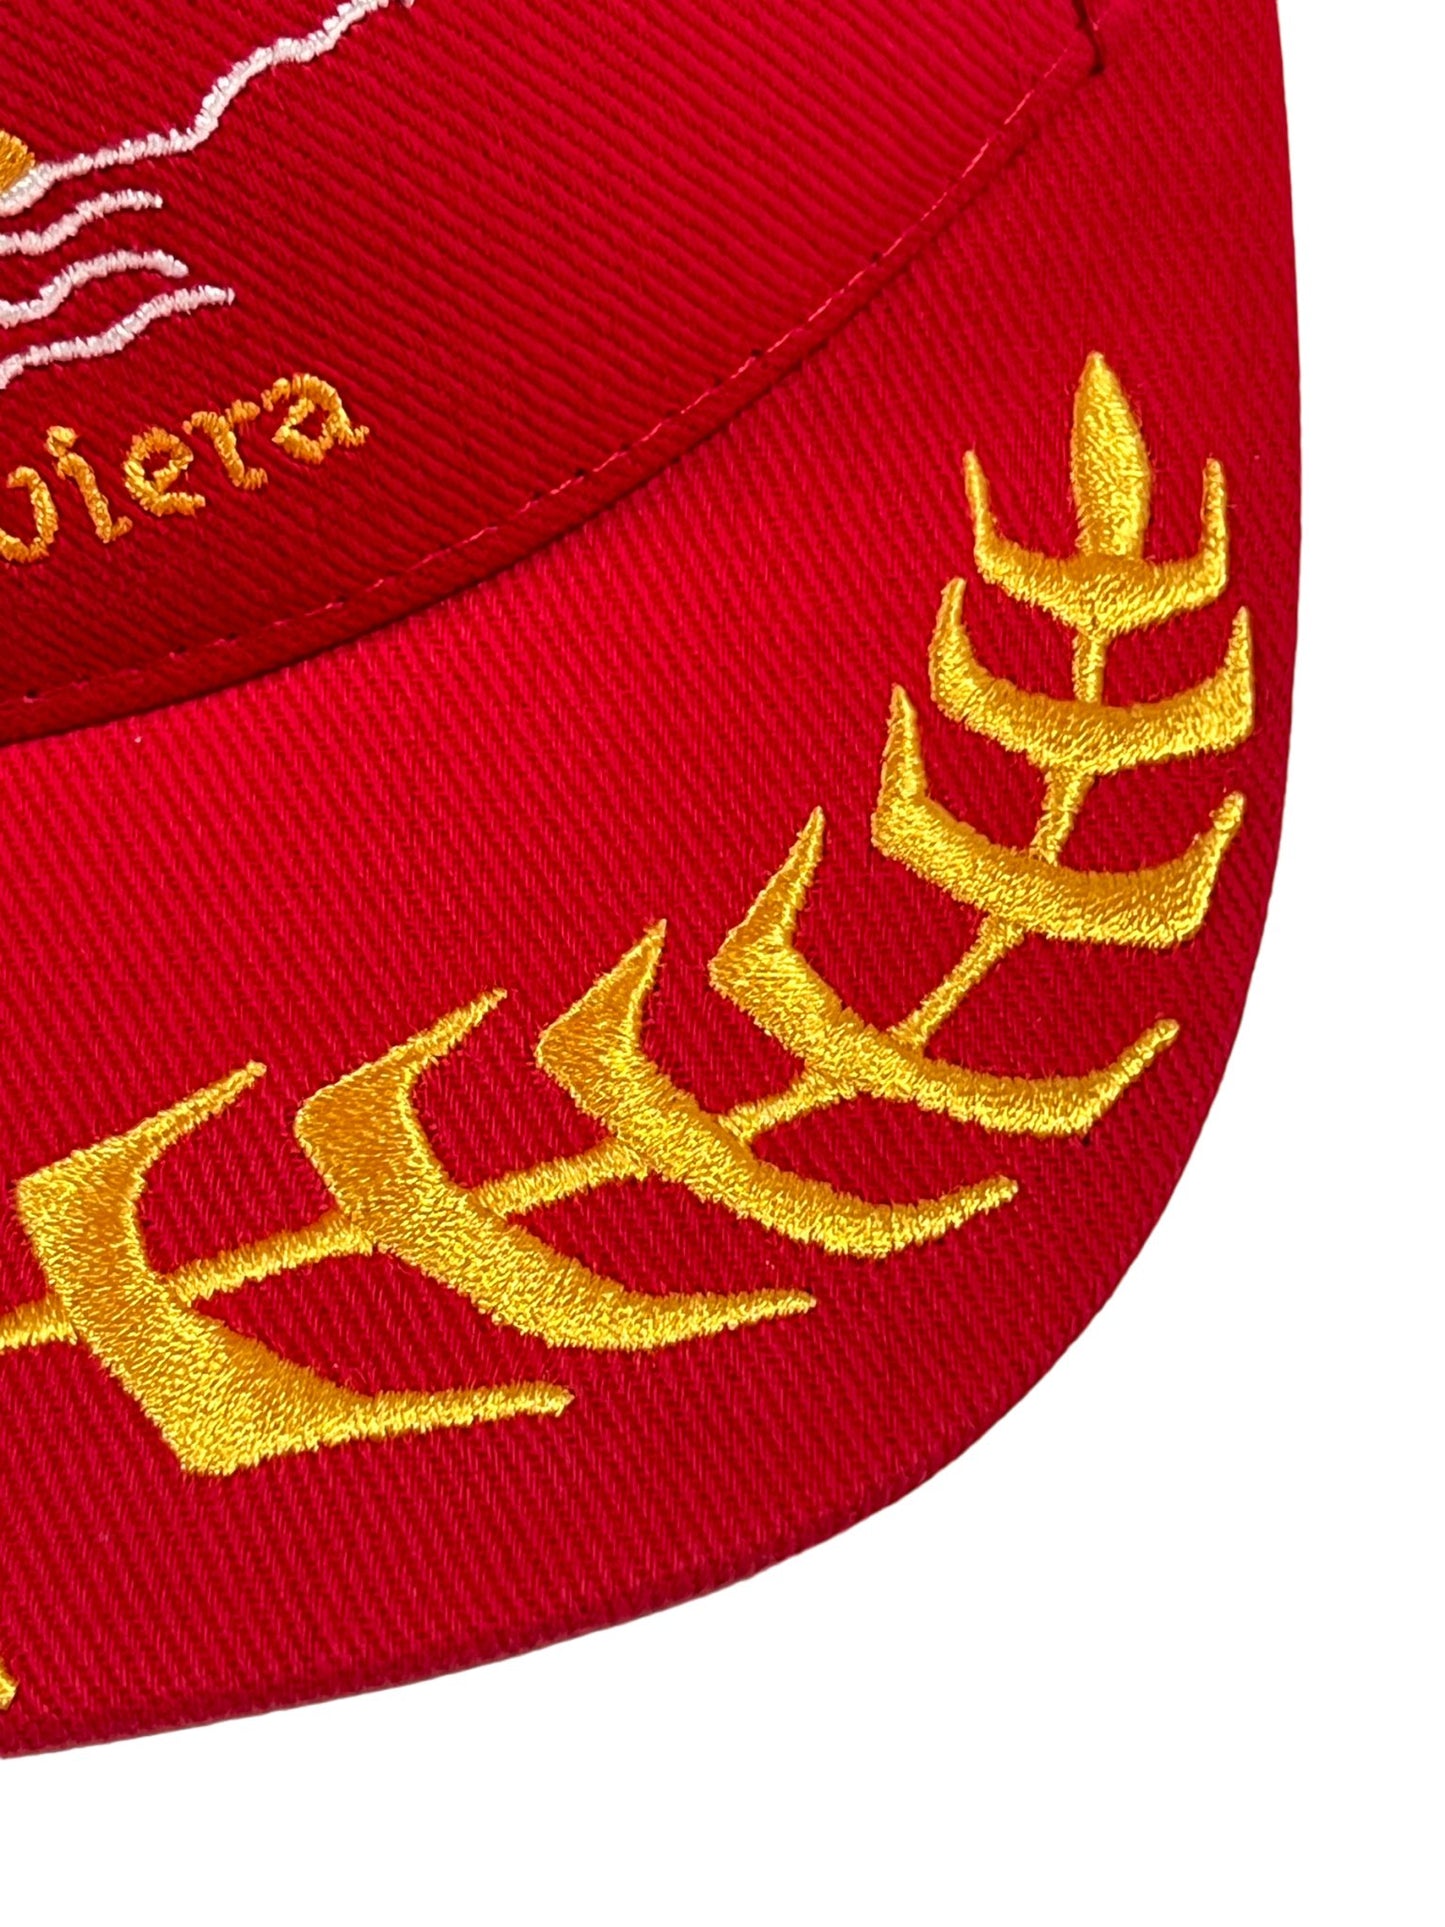 Close-up of a red RHUDE RIVIERA SAILING HAT RED heavyweight cotton hat with gold embroidery, featuring a laurel wreath and Rhude logo design.